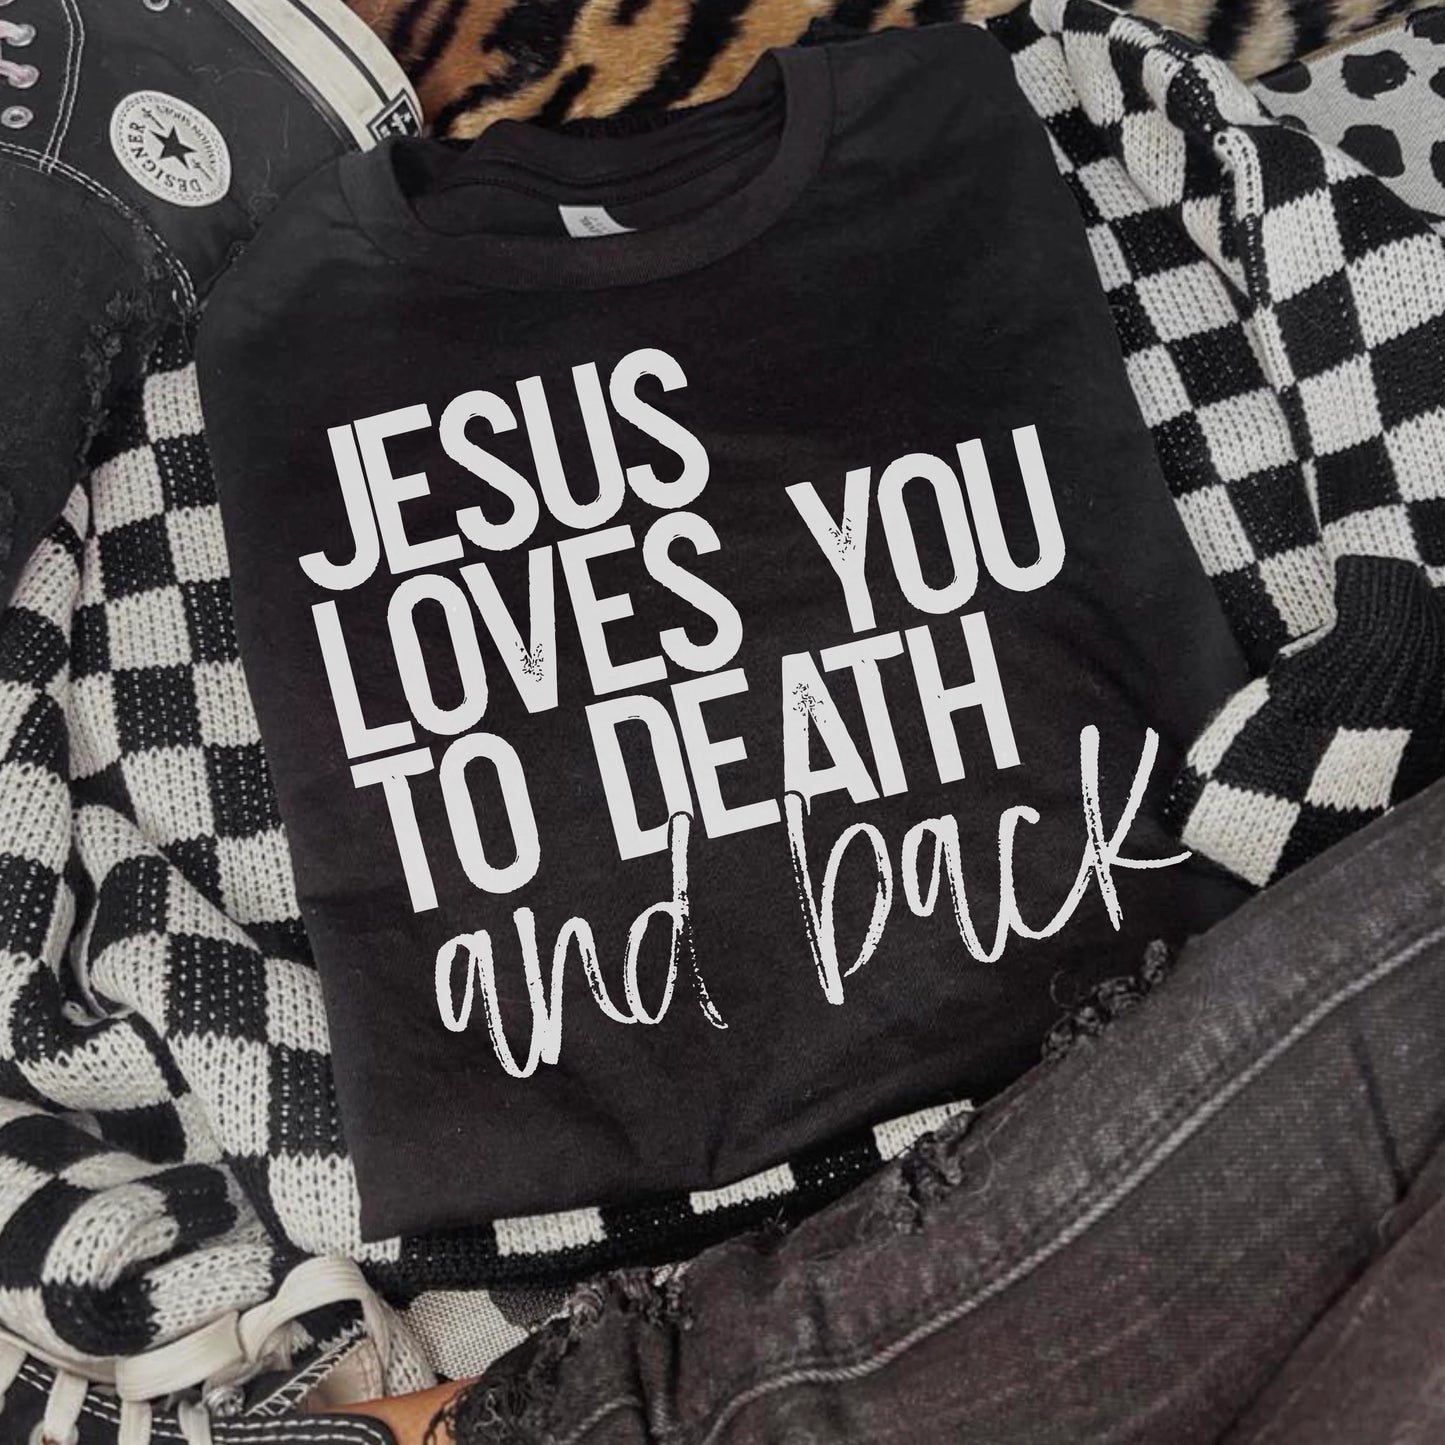 Jesus loves you to death and back - Completed Tee